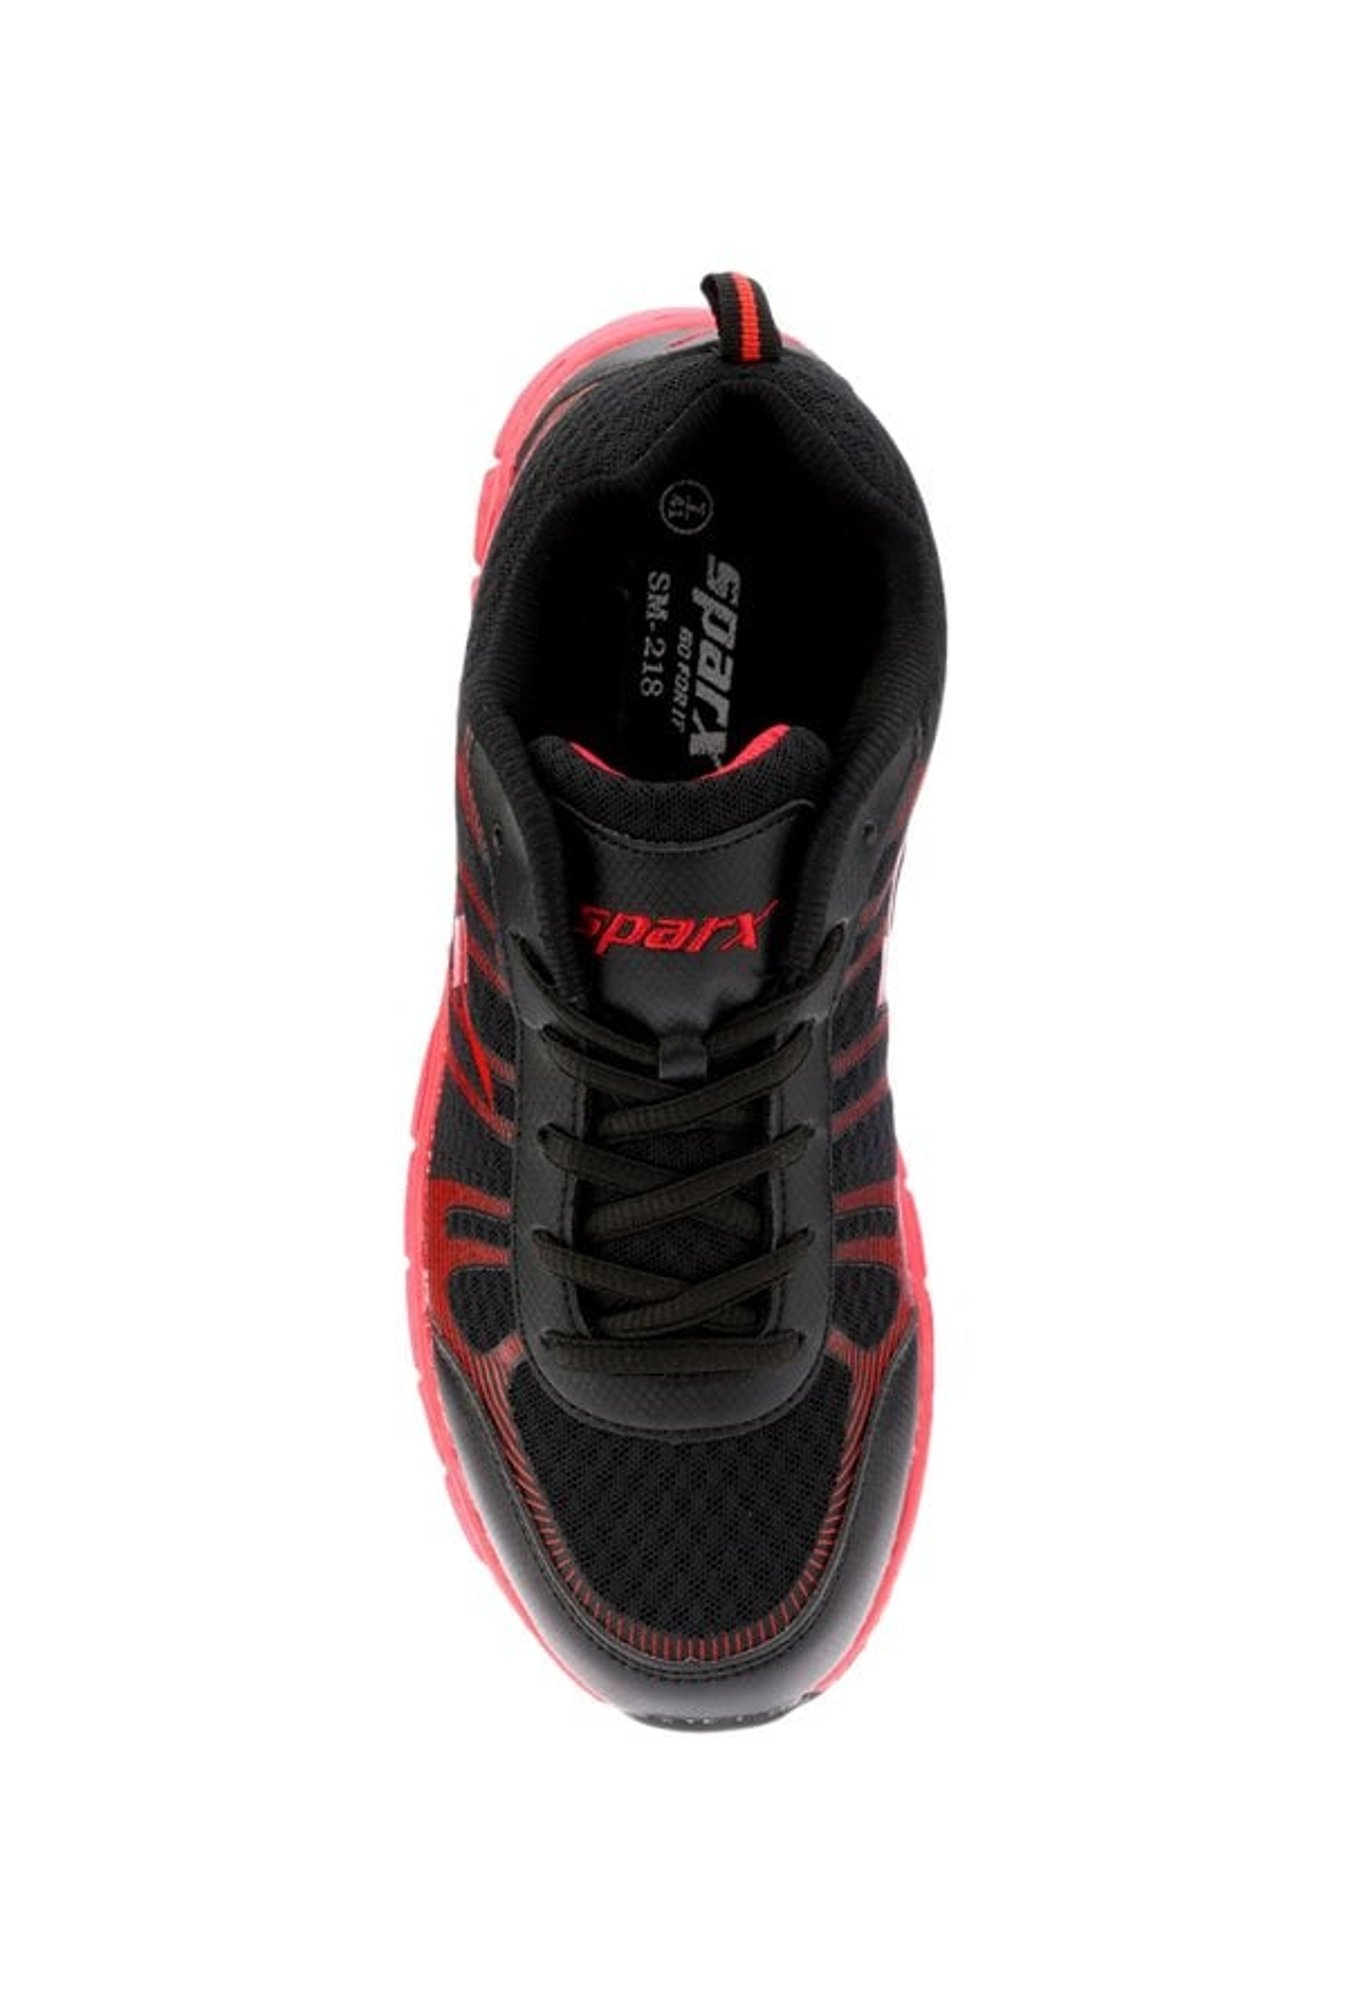 Sparx Black \u0026 Red Running Shoes from 